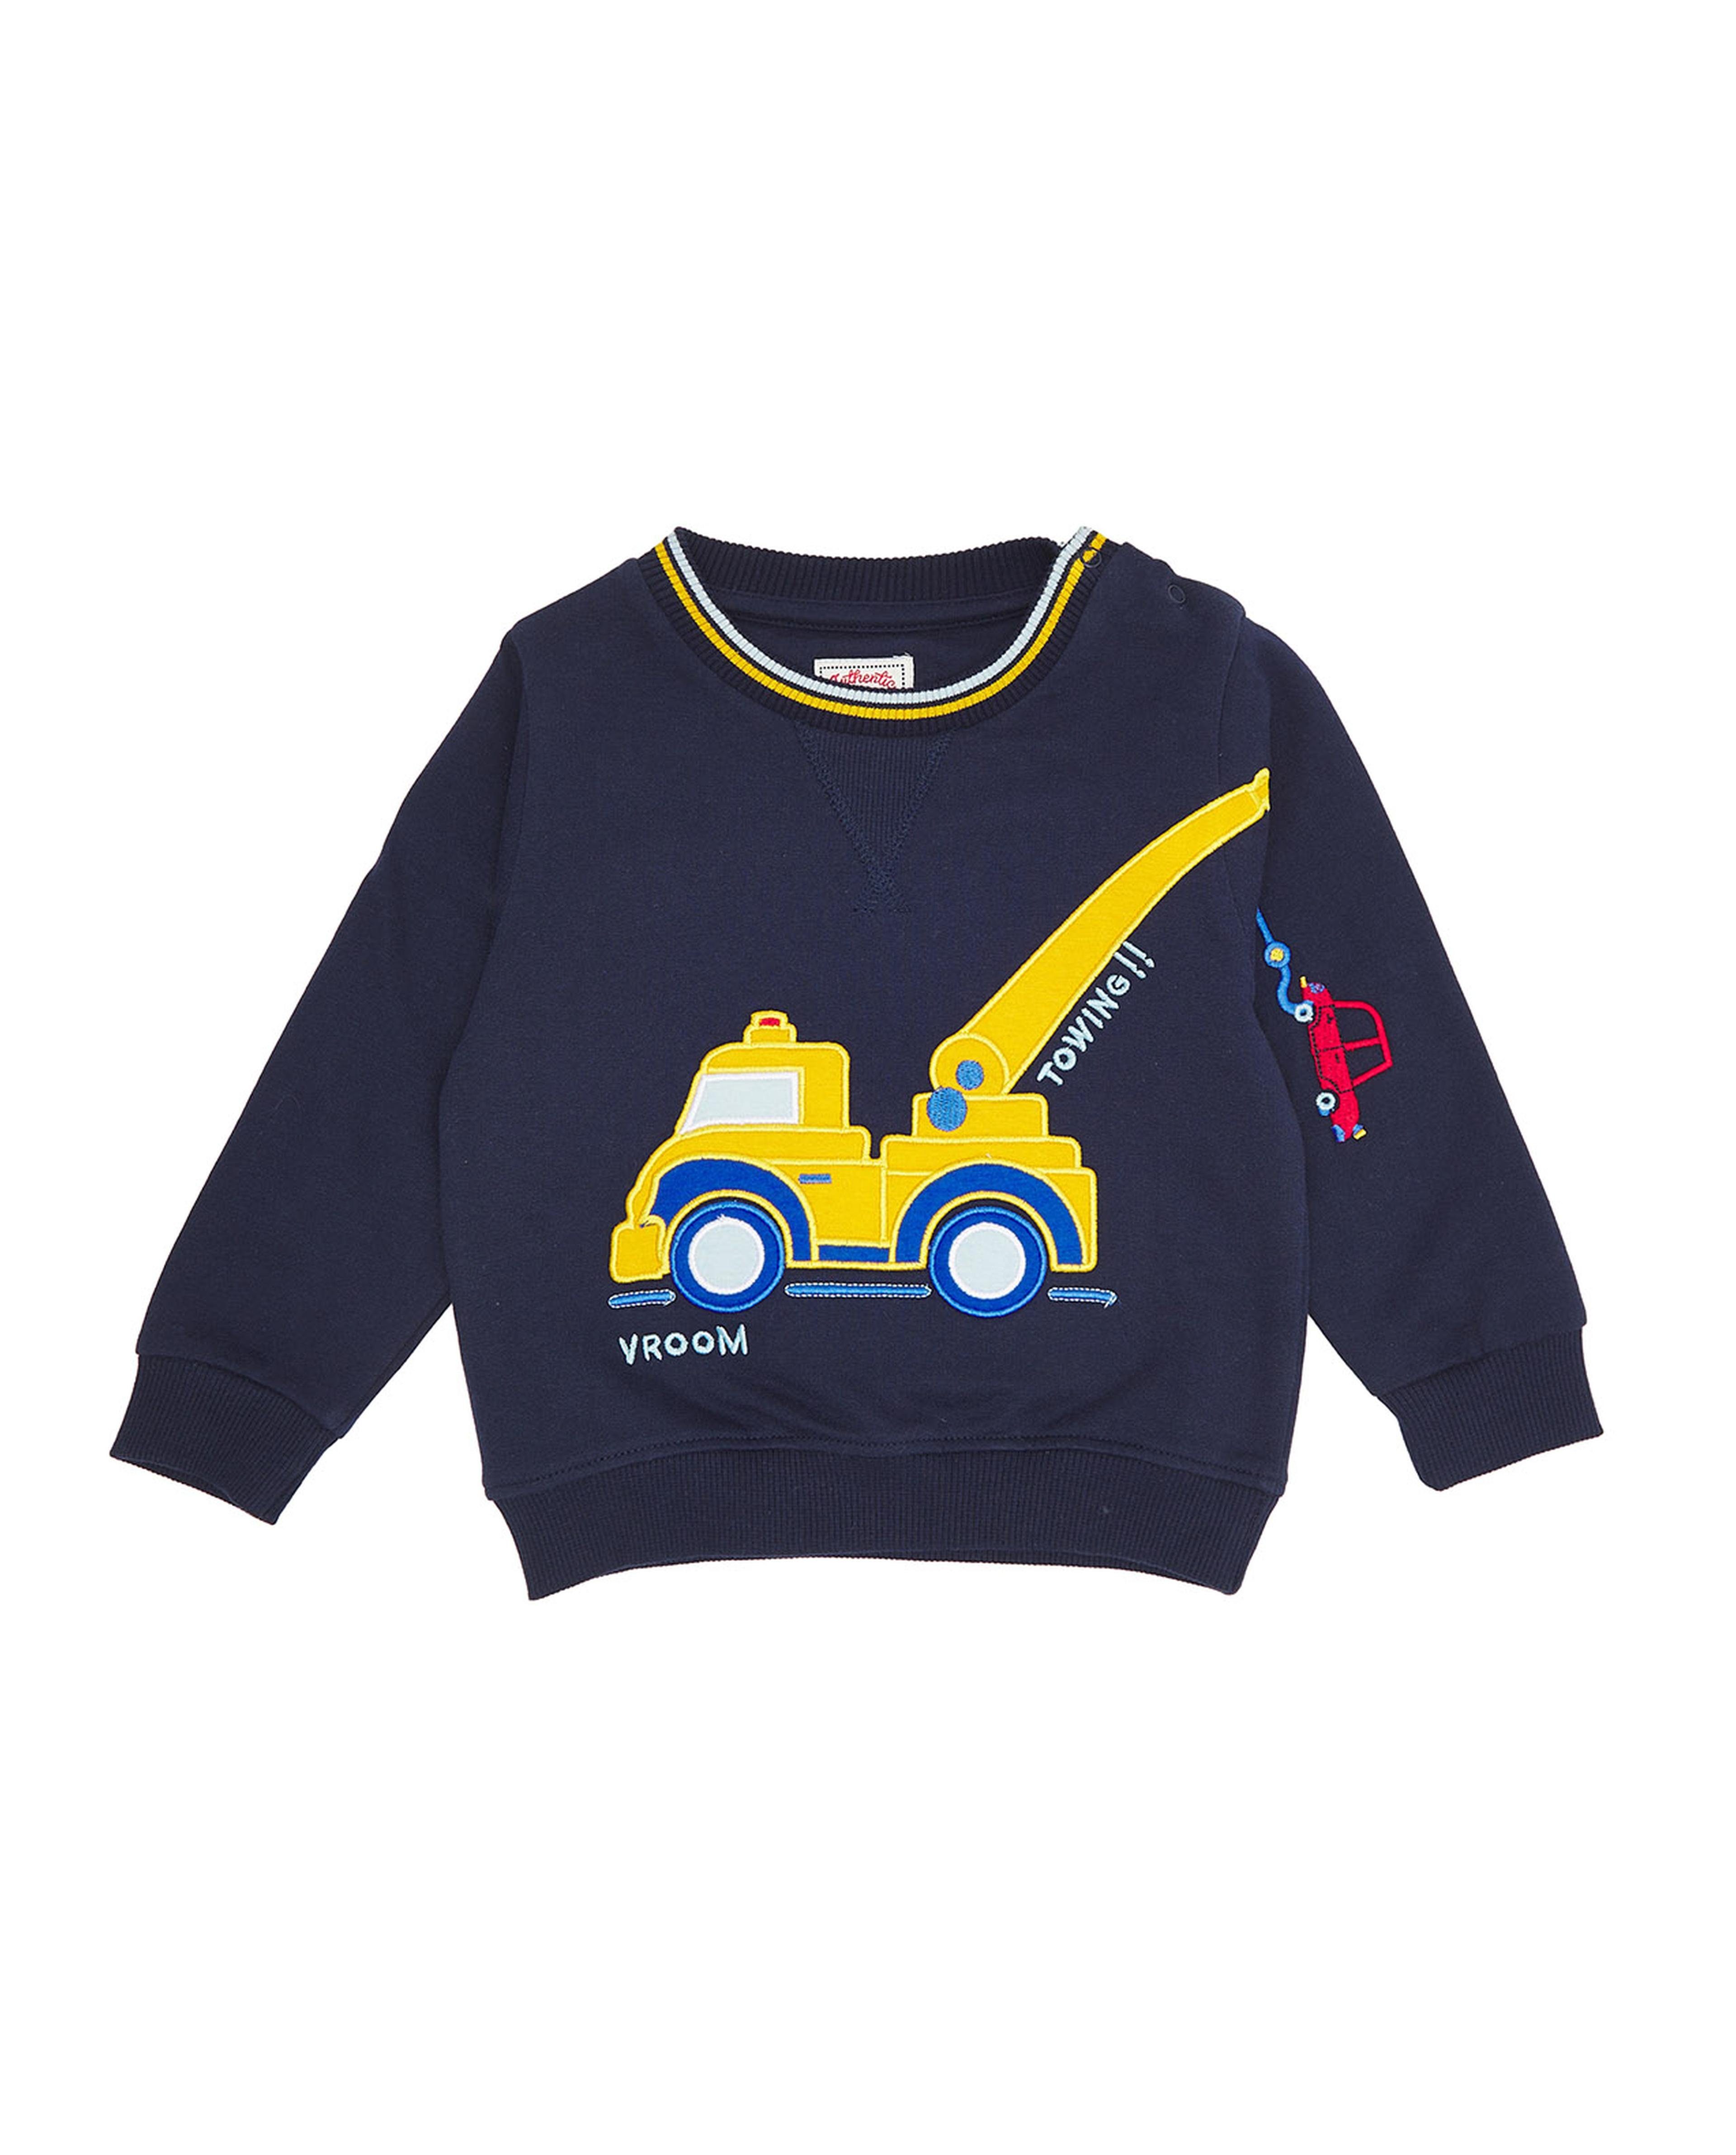 Applique Work Sweatshirt with Crew Neck and Long Sleeves